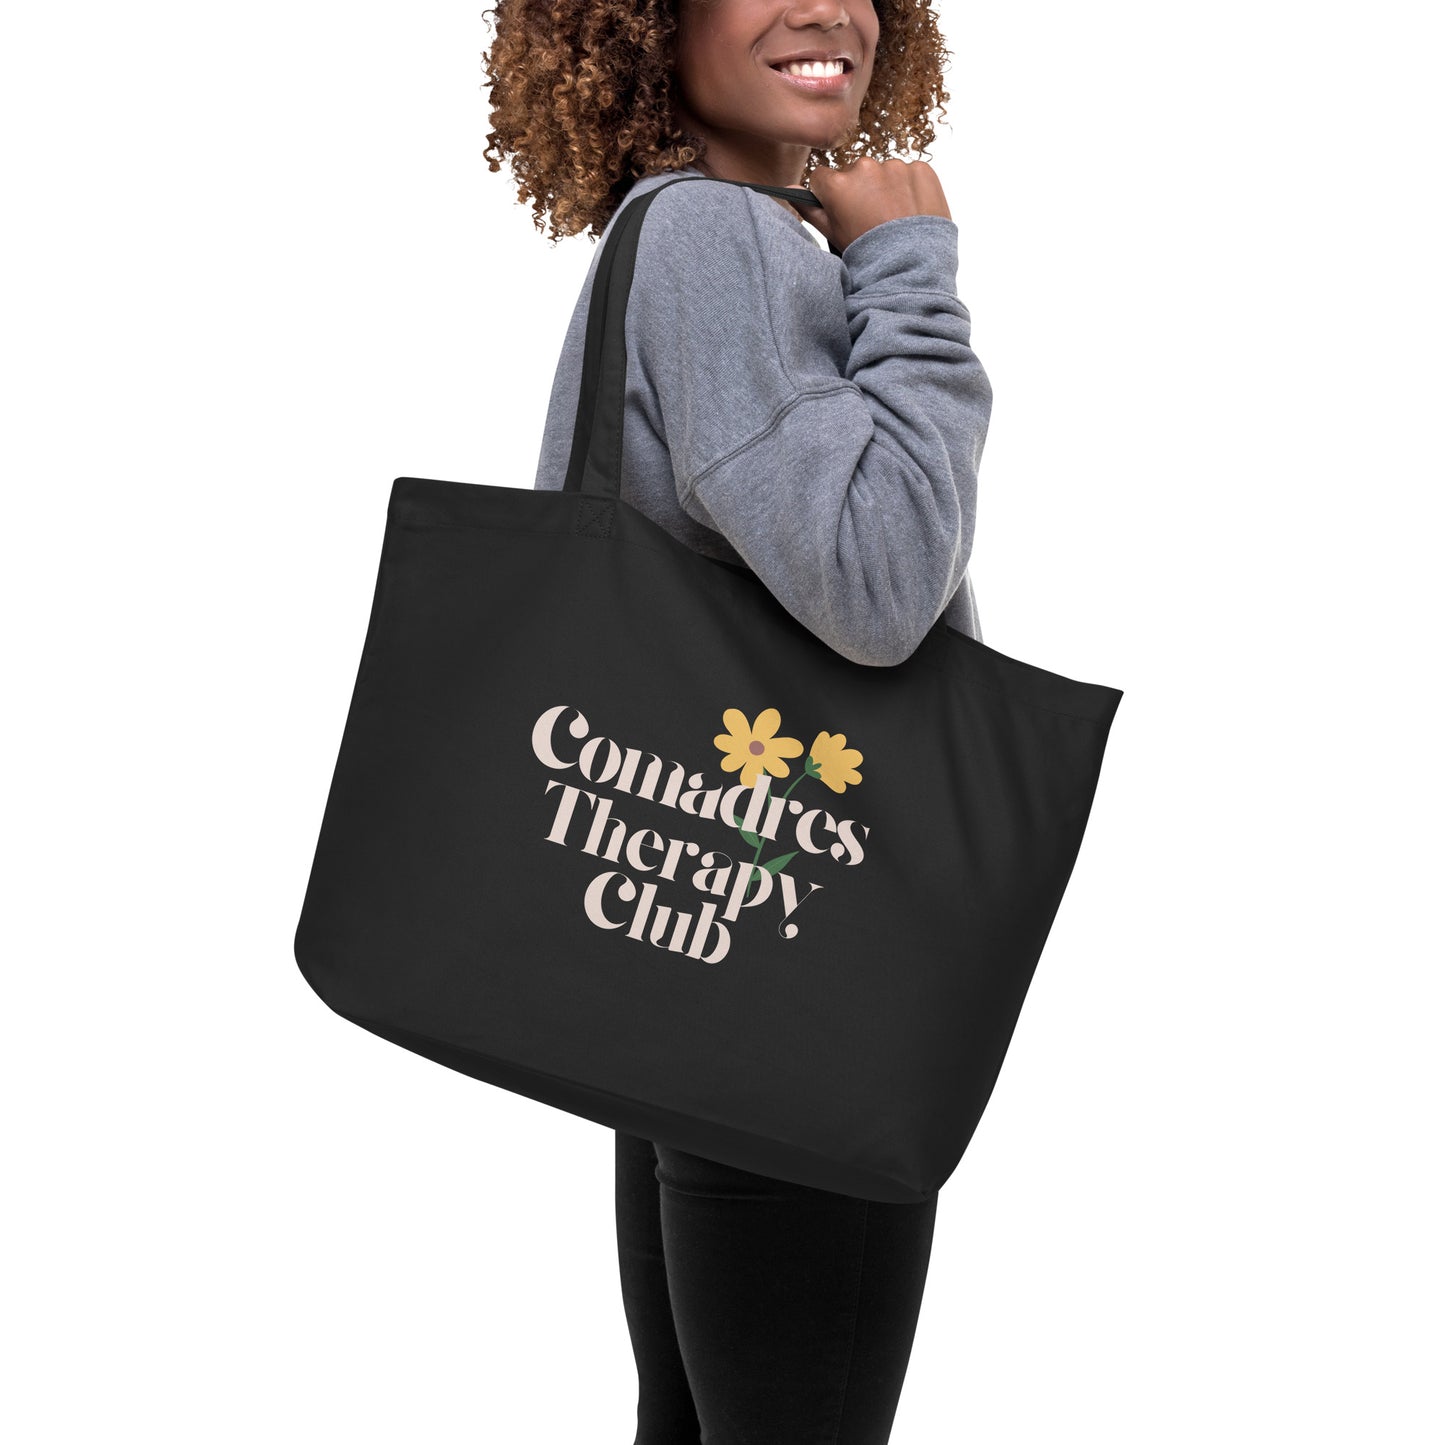 Comadres Therapy Club Tote